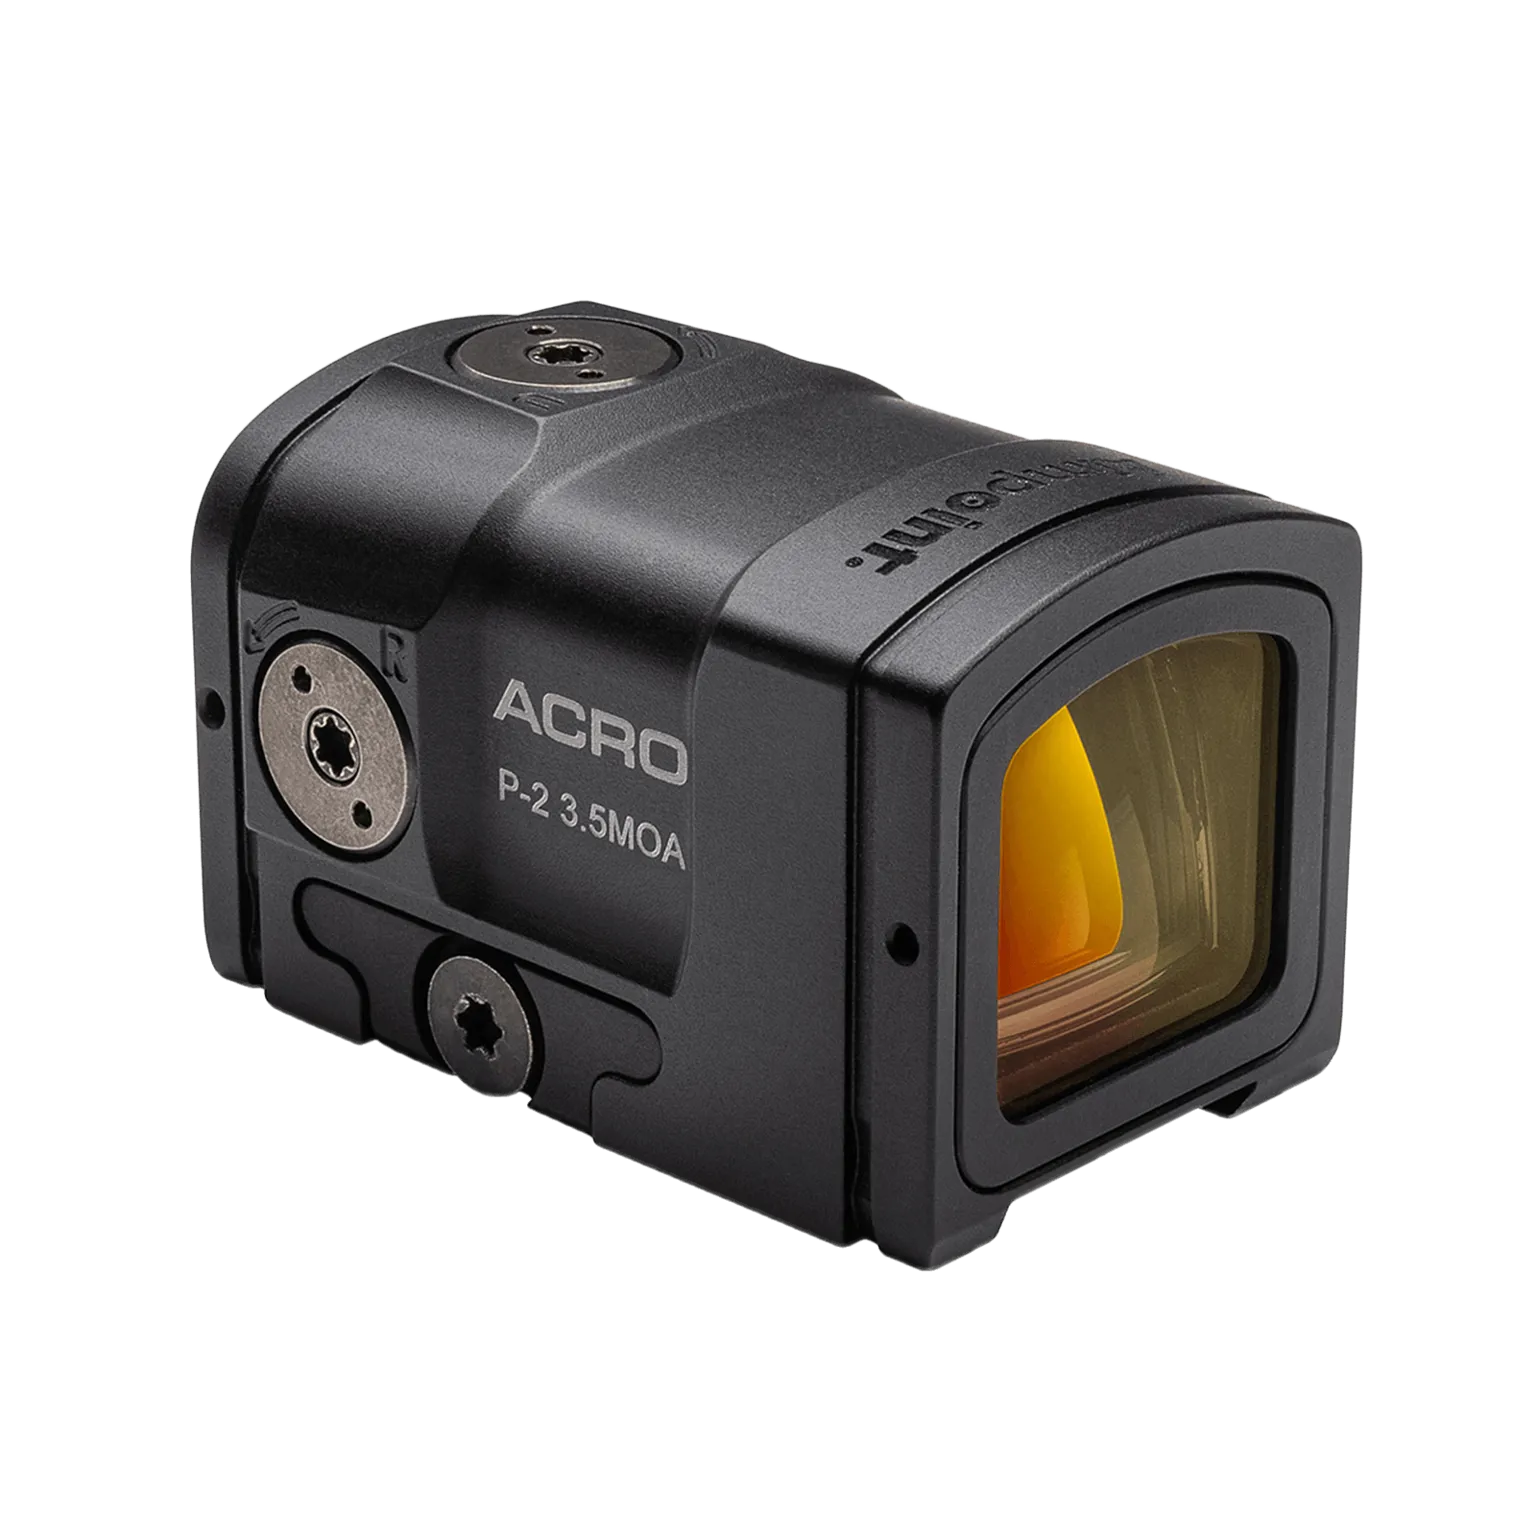 Acro P-2™ 3.5 MOA - Red dot reflex sight with integrated Acro™ interface - 3